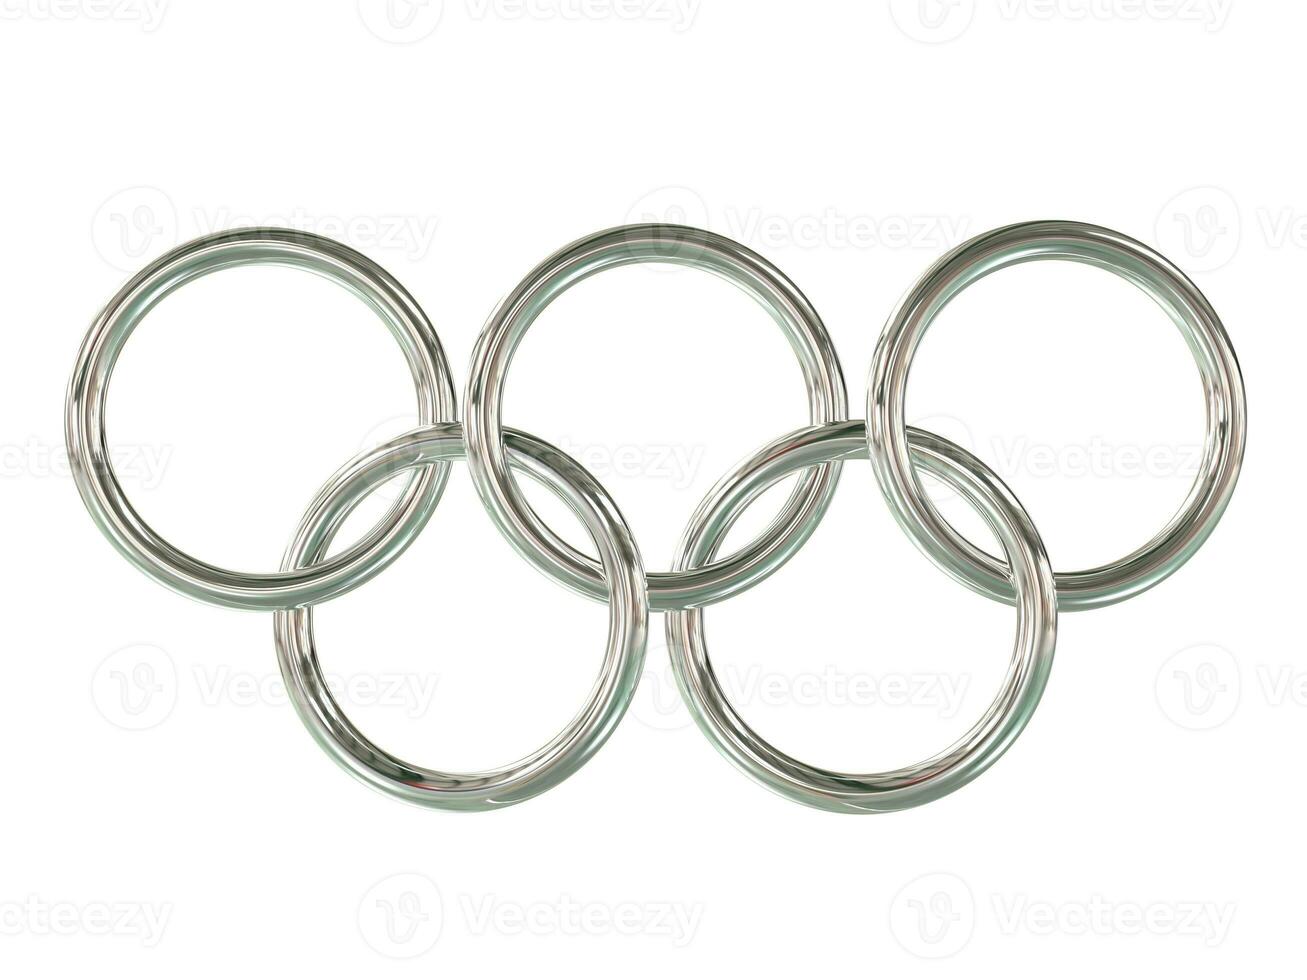 Olympic games rings - chrome metal - 3D Illustration photo